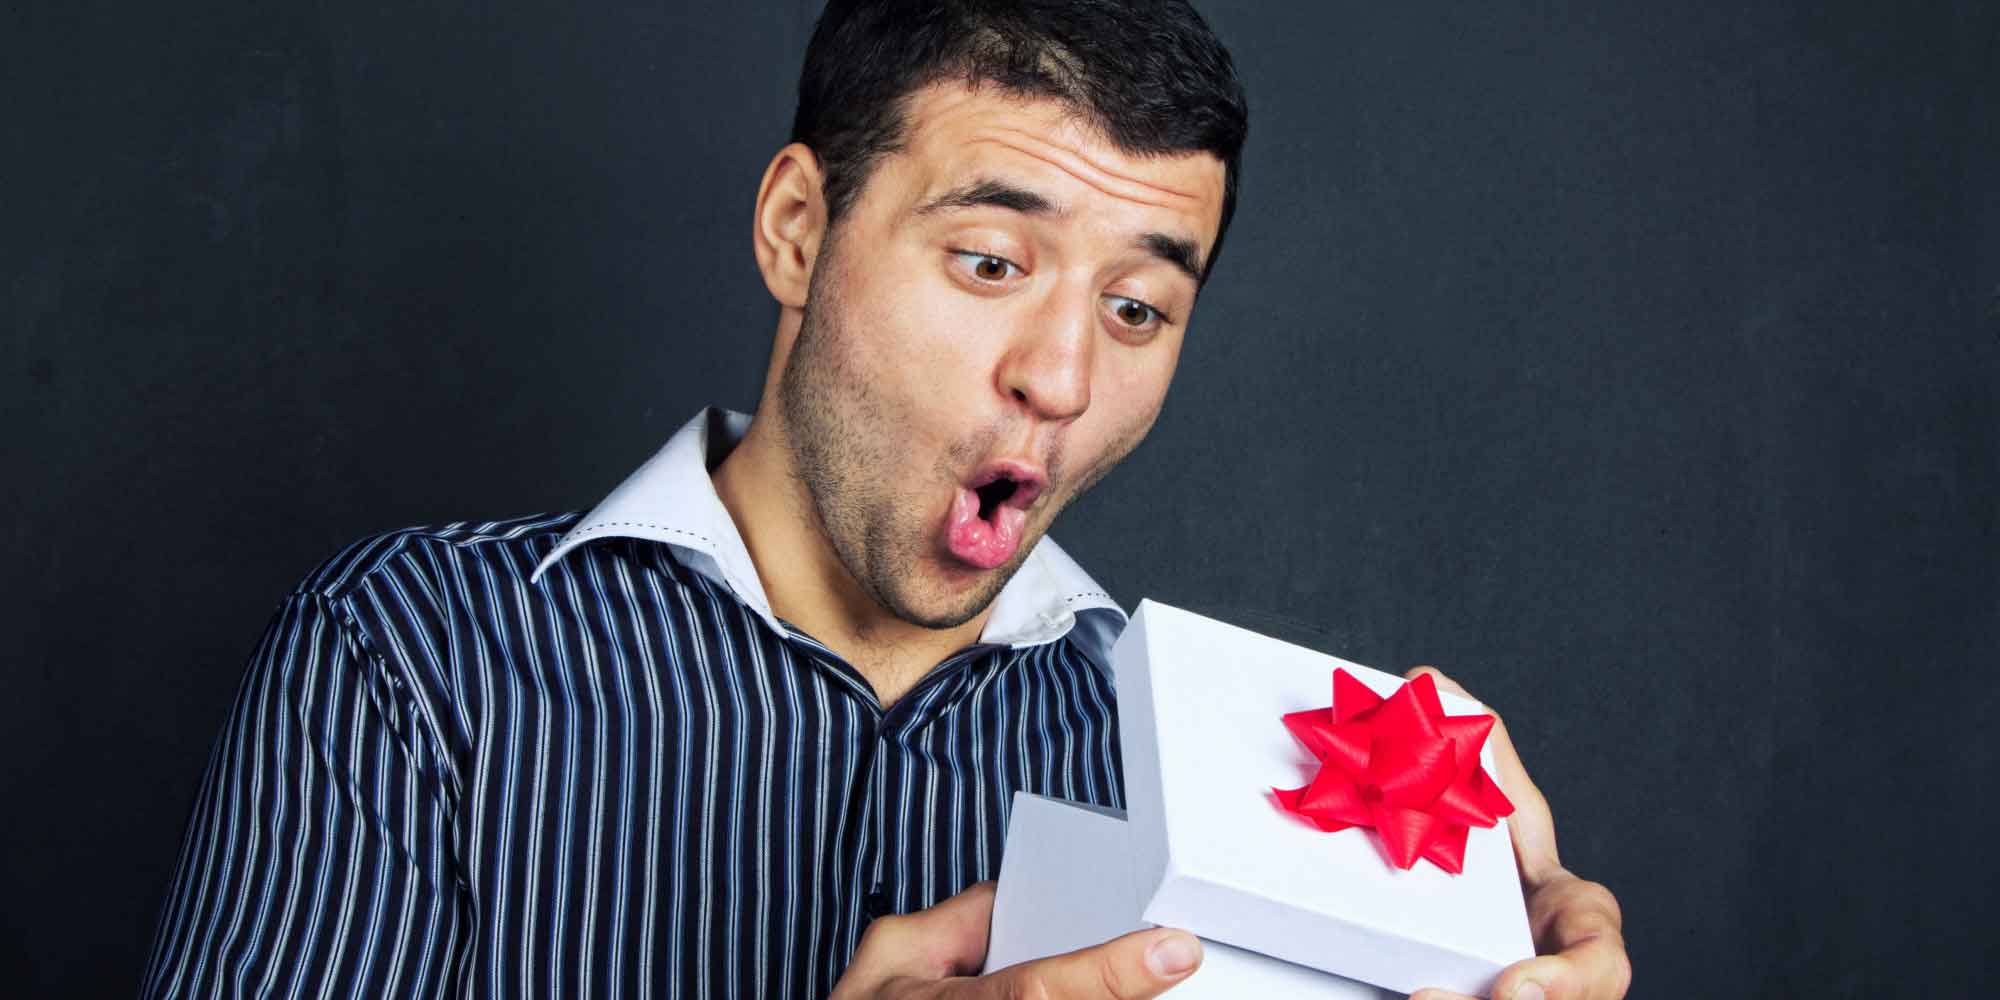 5 Unique Gifts for Him